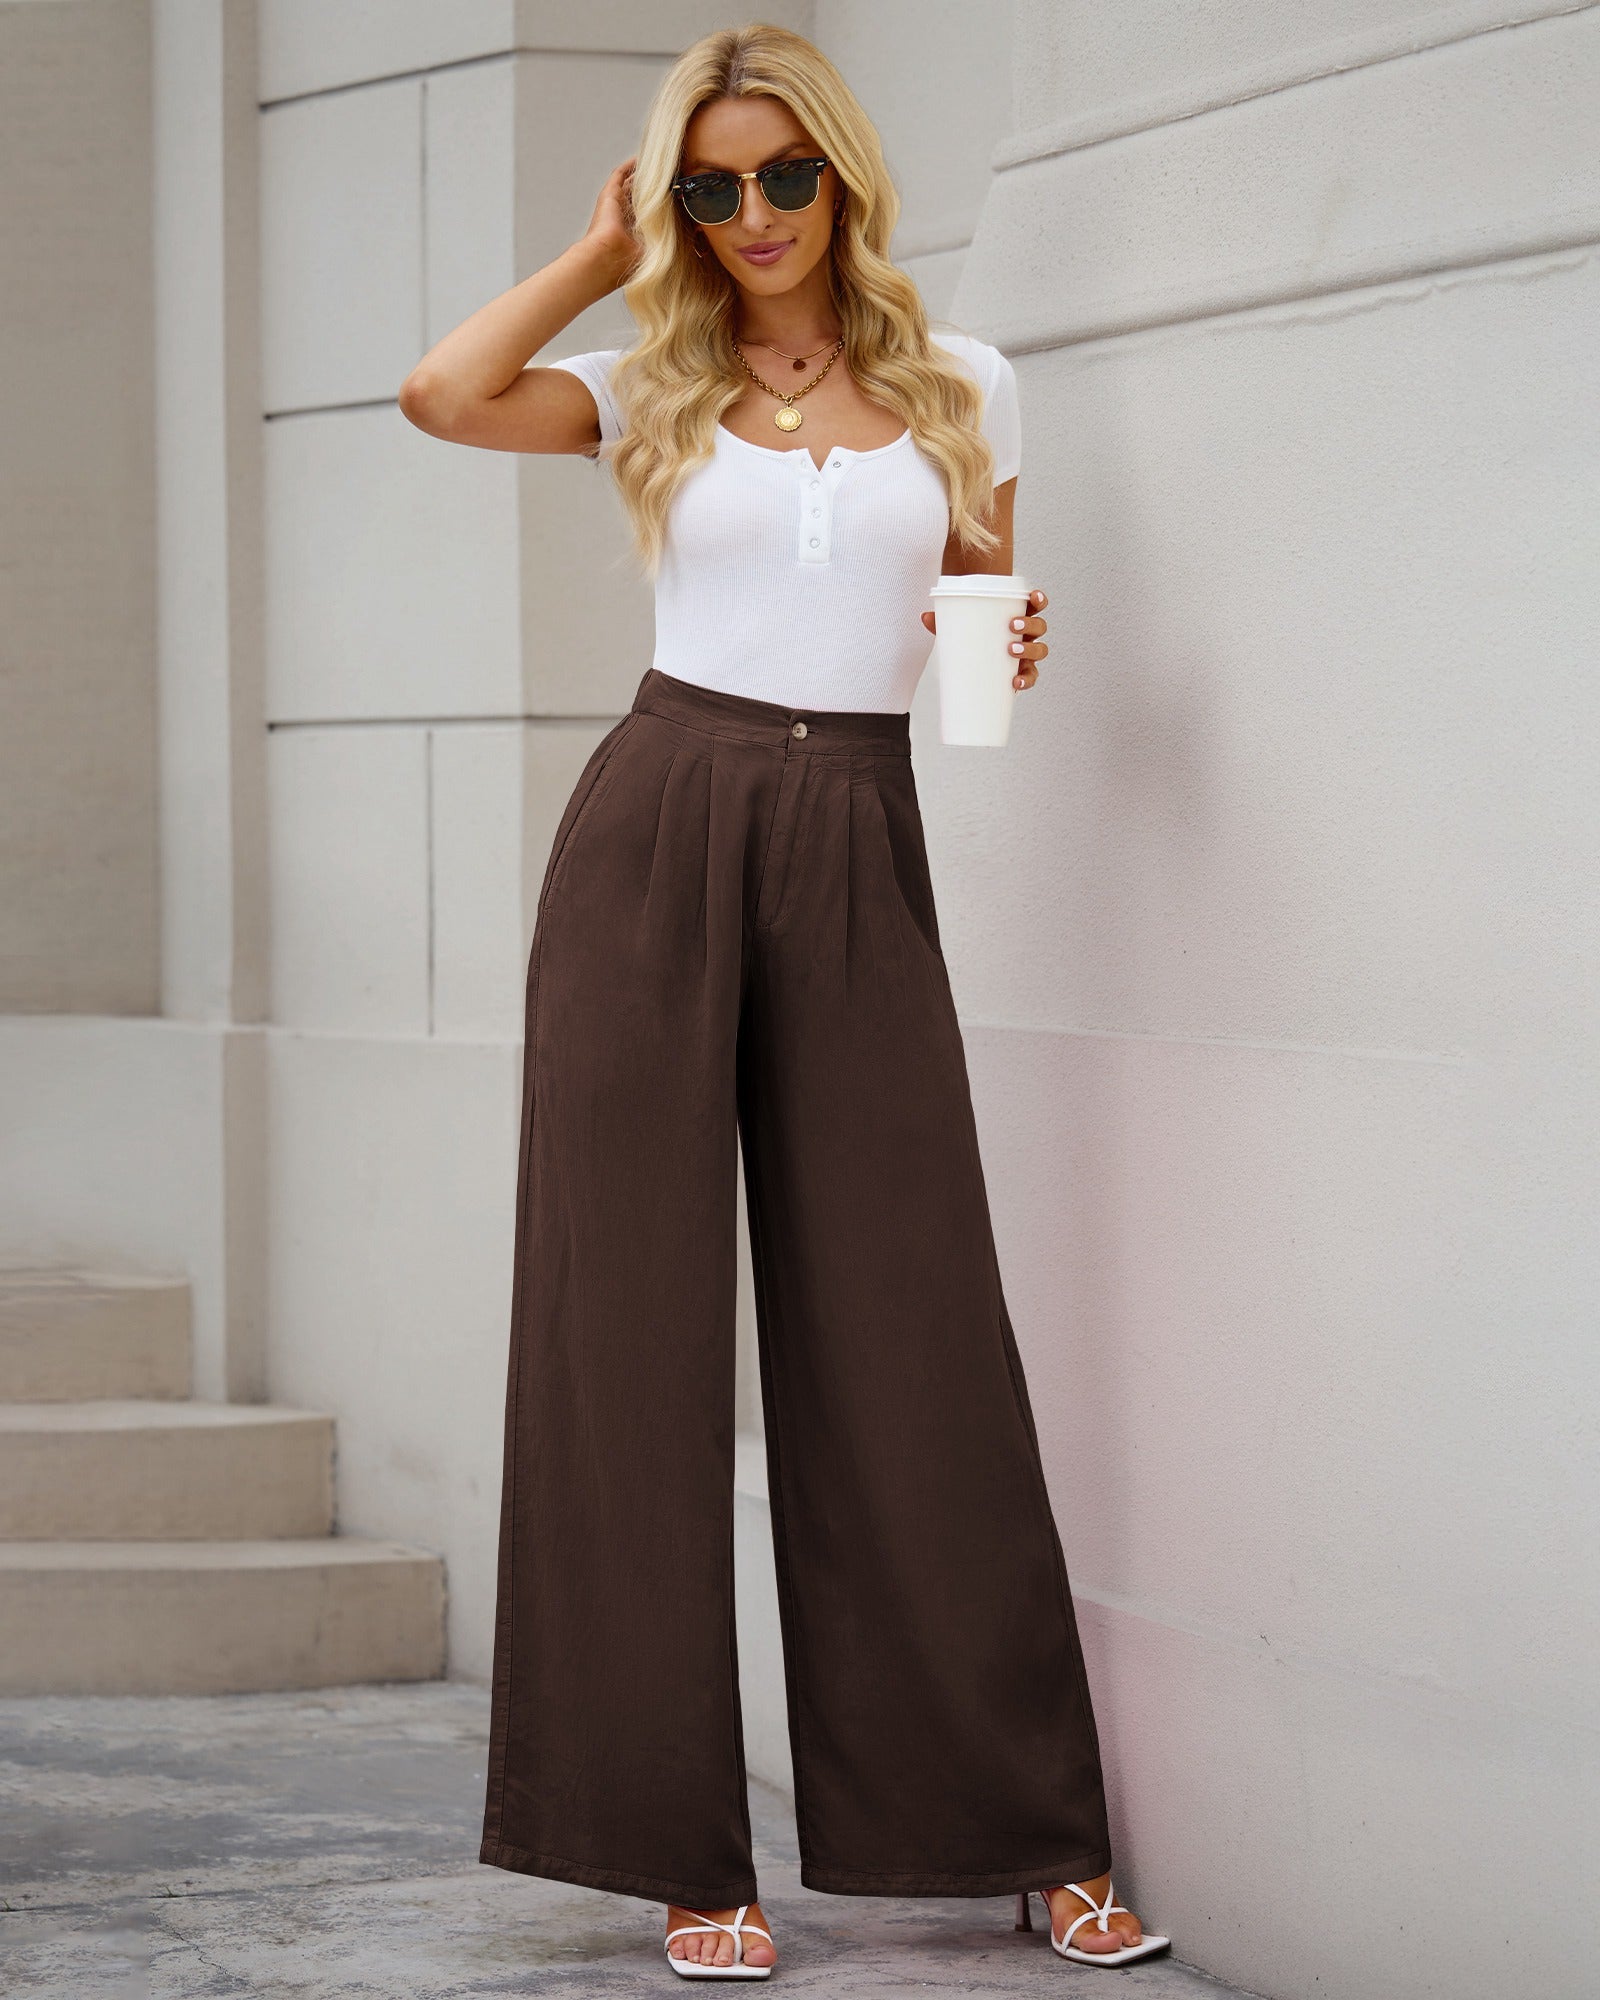 High Waisted Flowy Pants for Women Trendy Wide Leg Baggy Beach Palazzo  Pants Stretchy Drawstring Pants with Pockets